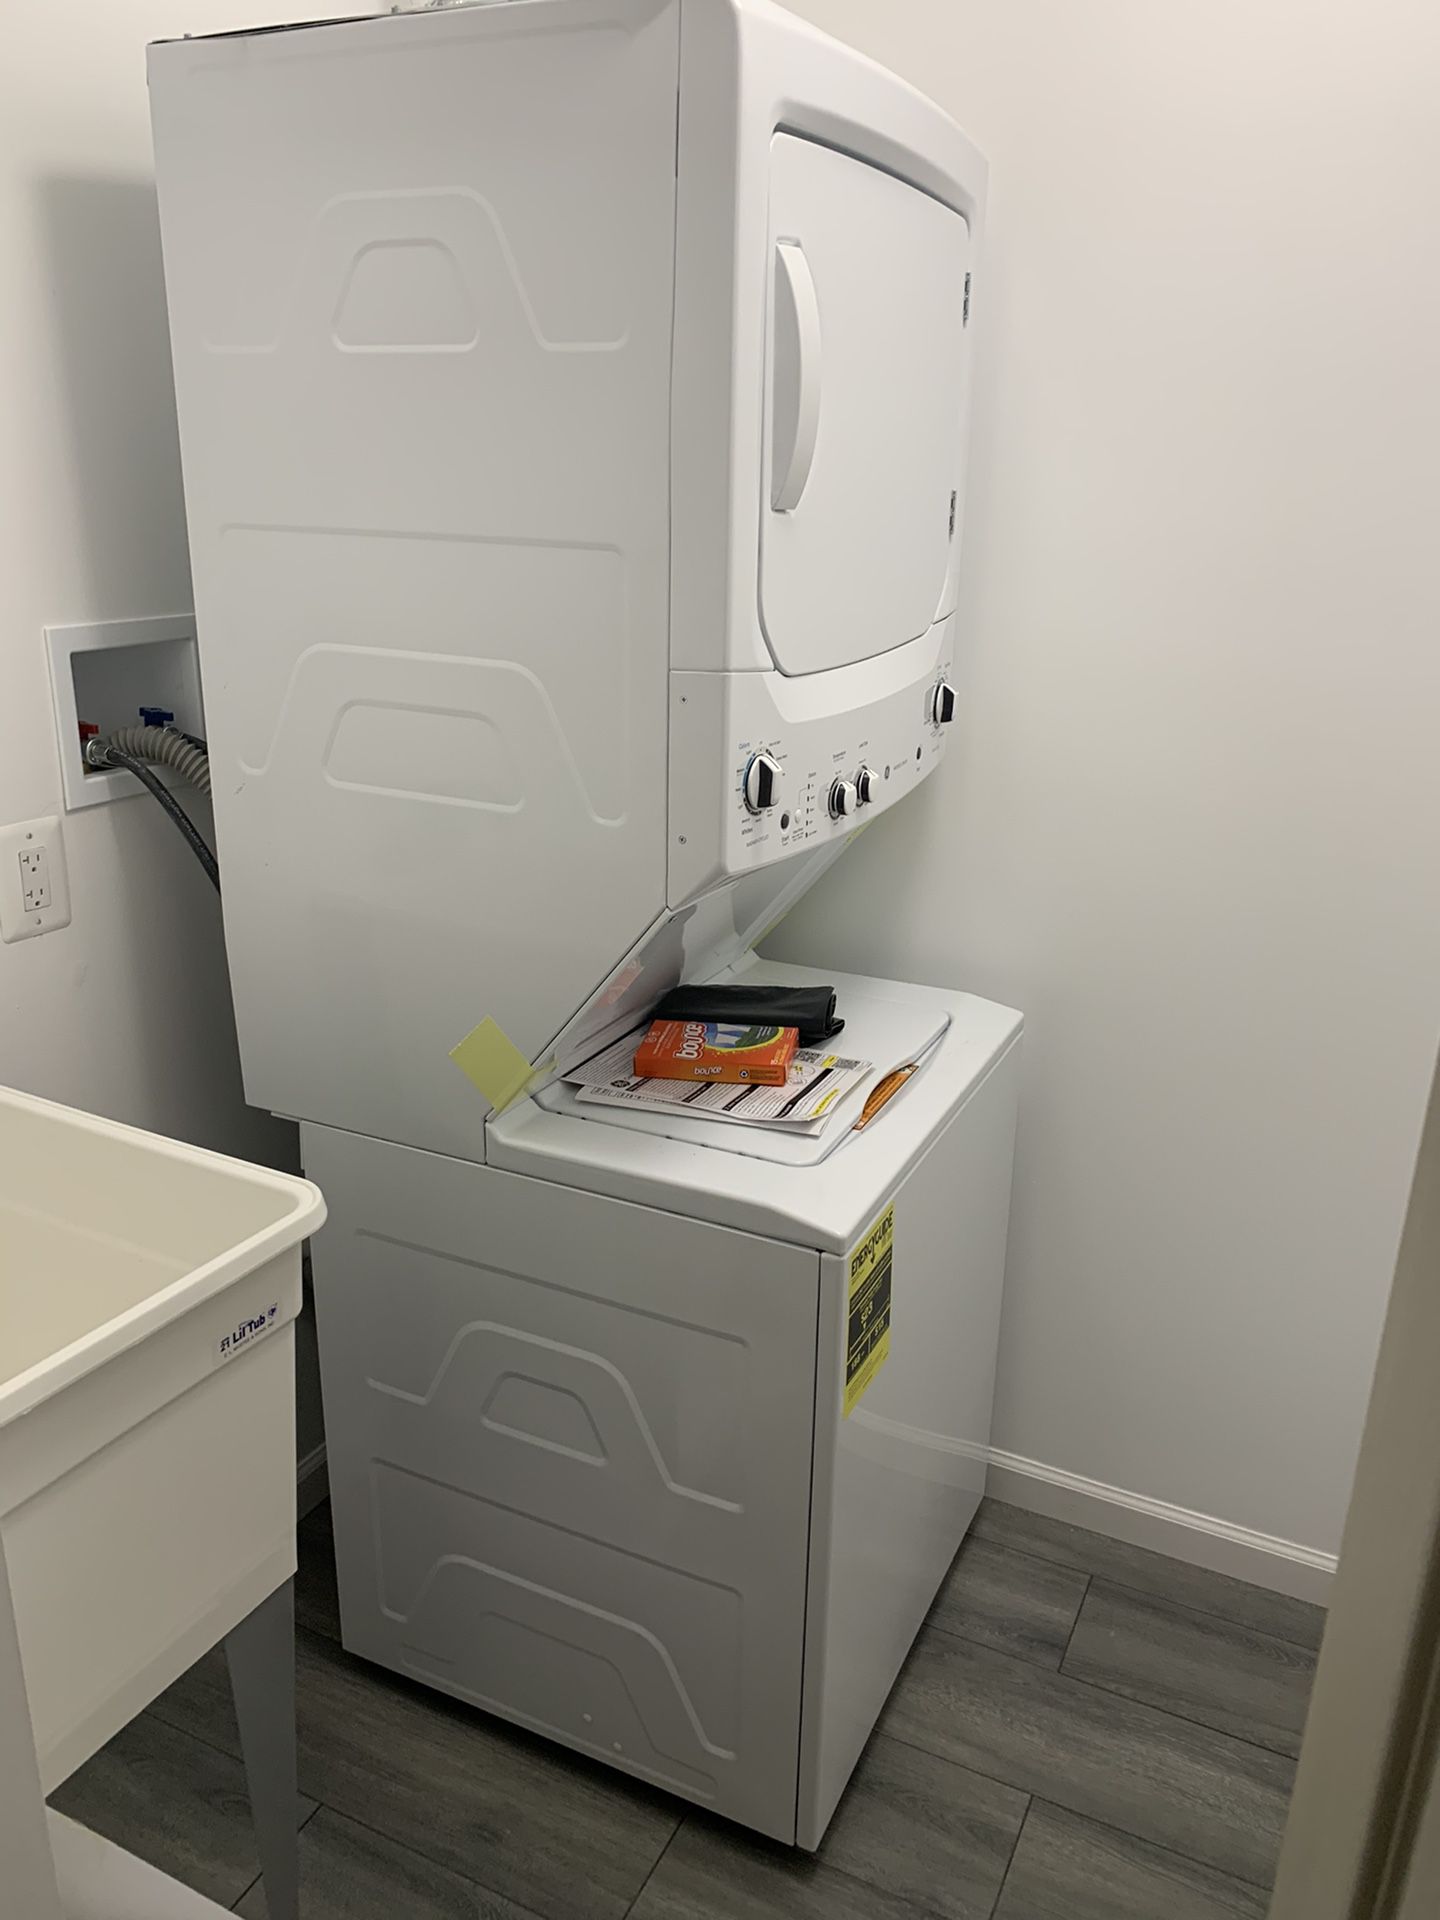 GE washer/Dryer combo